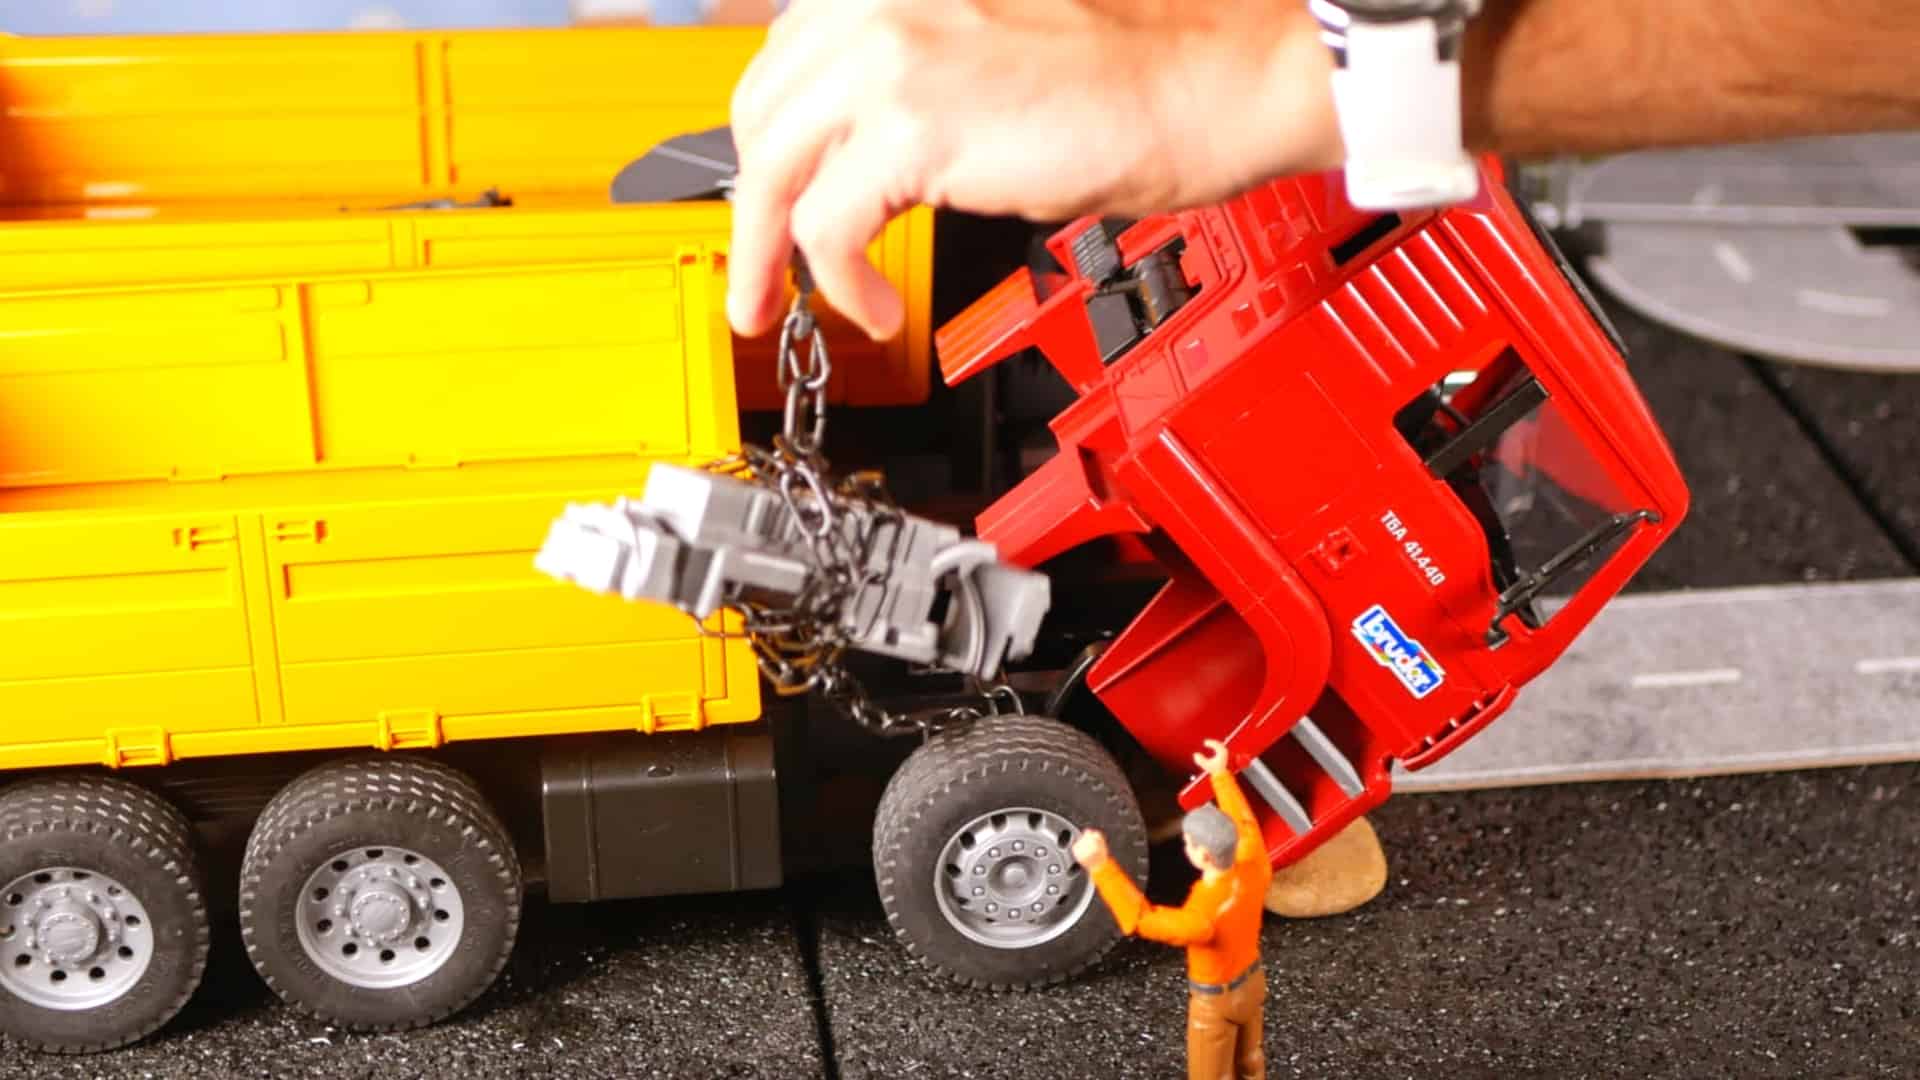 Remove the engine block from the Bruder MAN dump truck